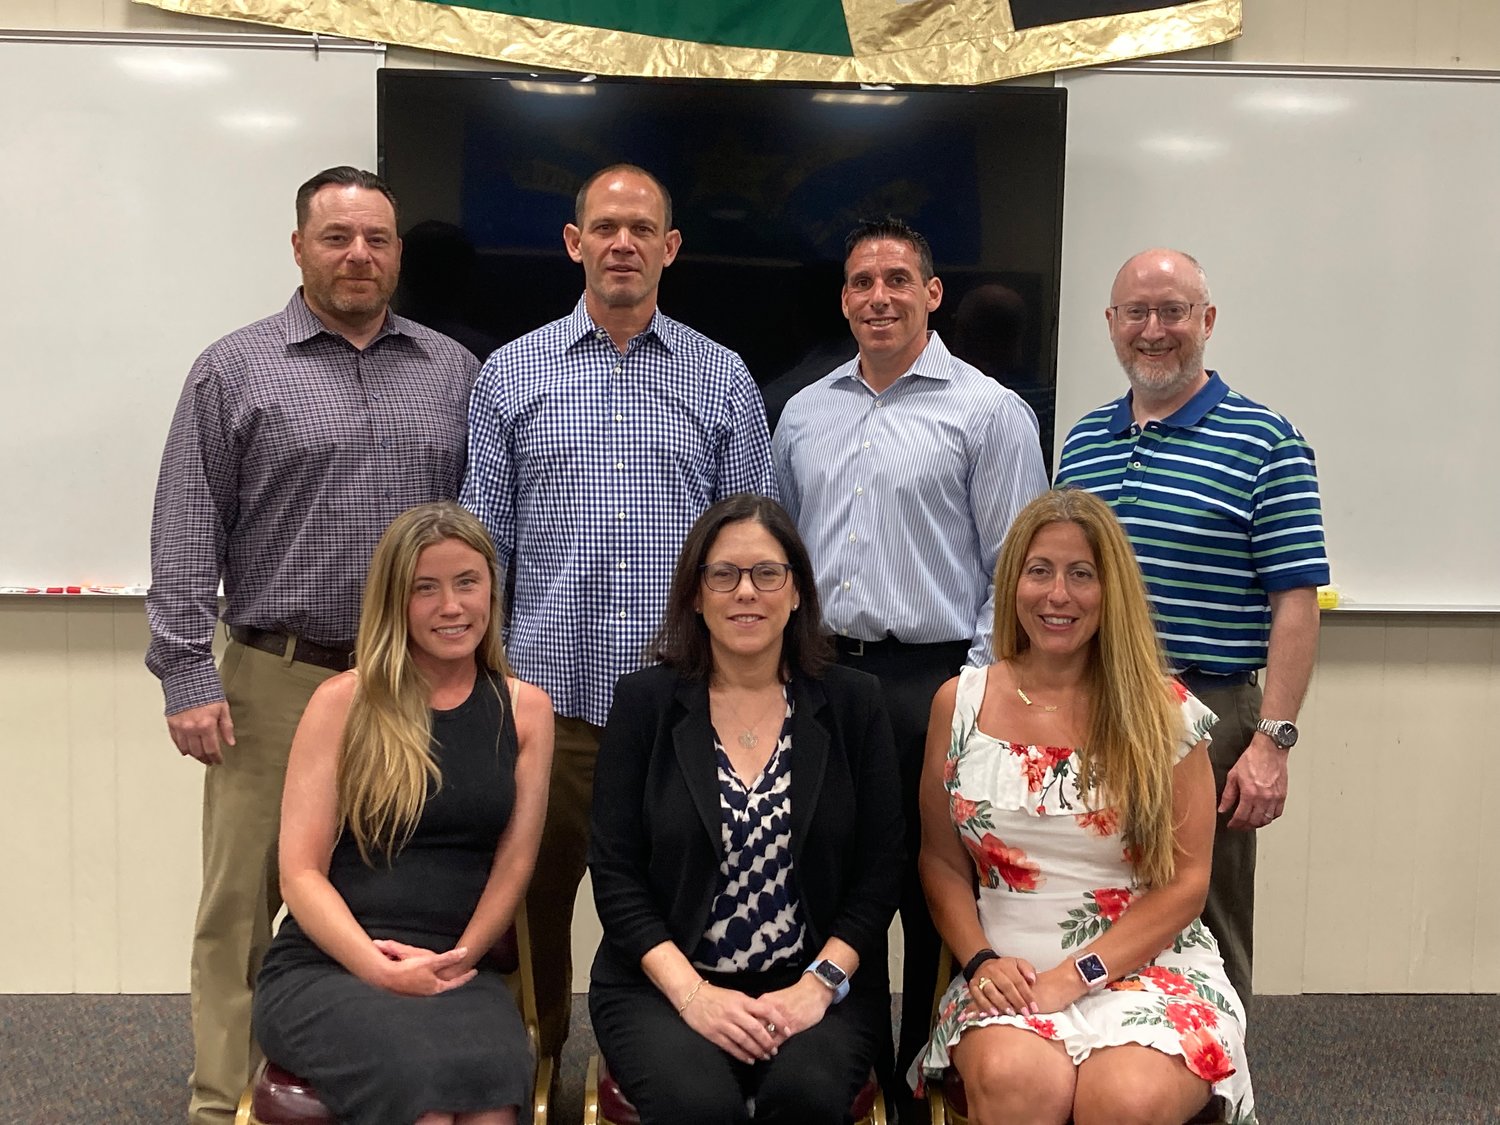 To begin the 2022-23 academic year, the Lynbrook Public School’s Board of Education held its annual reorganization meeting on July 5.